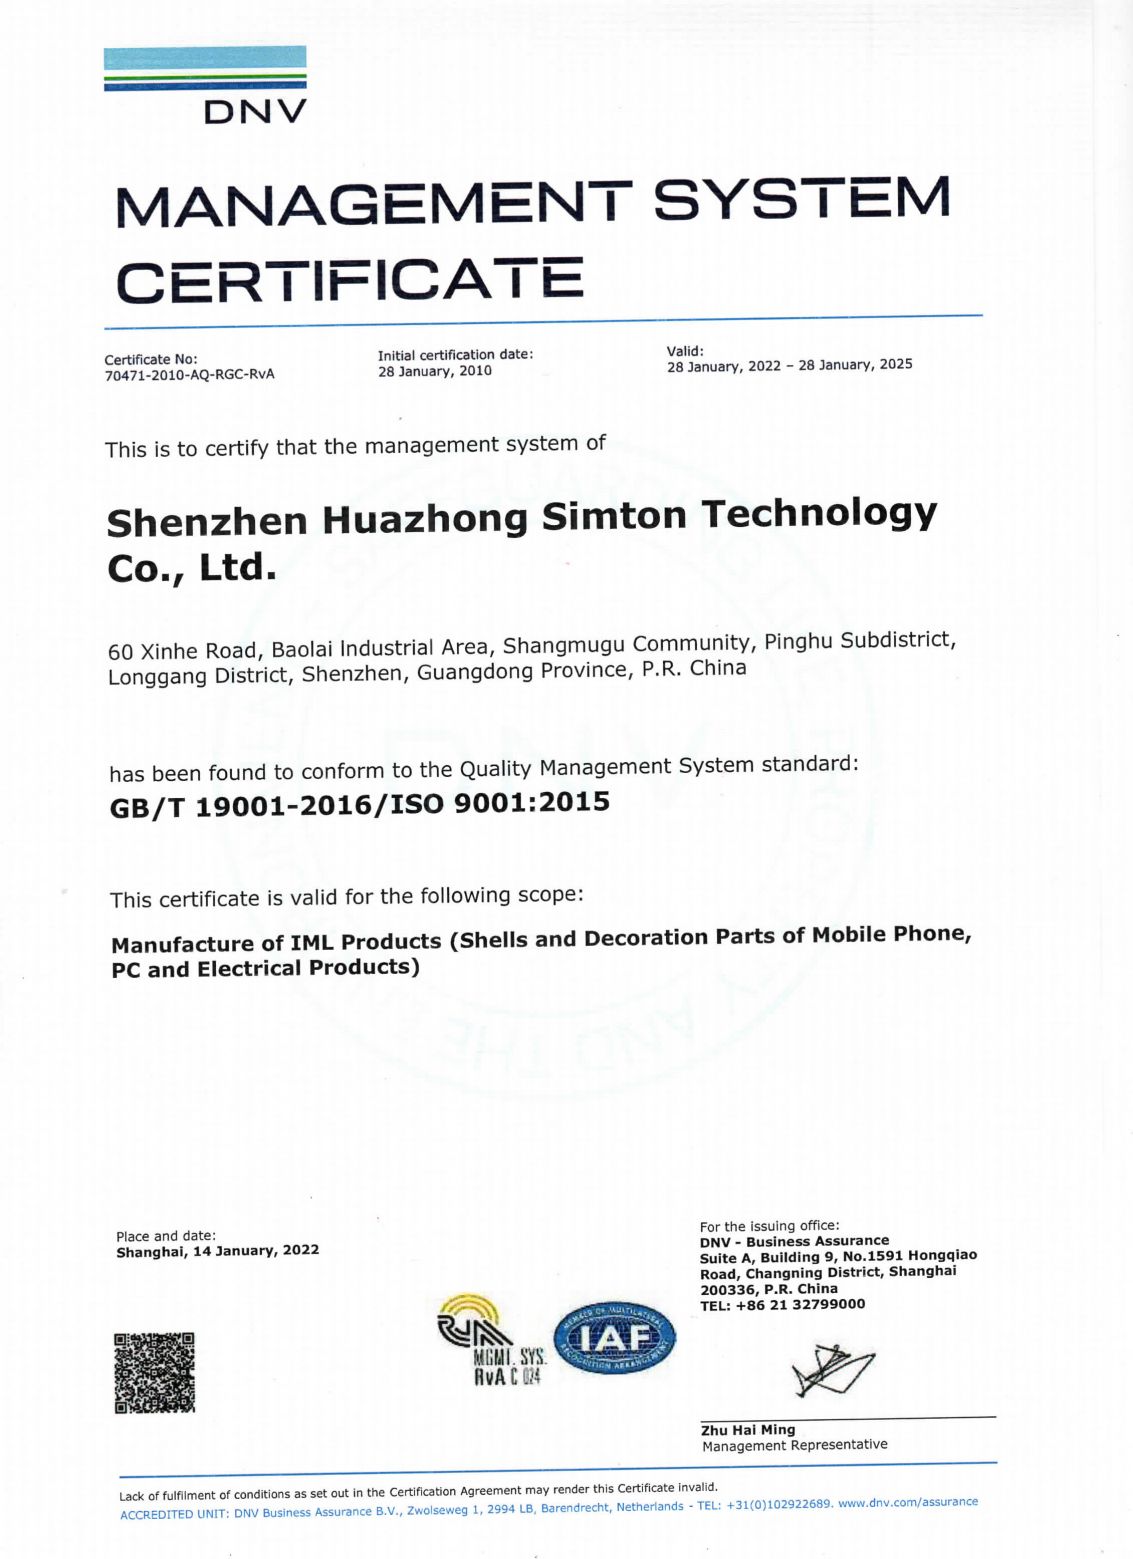 Management System Certificate - 2